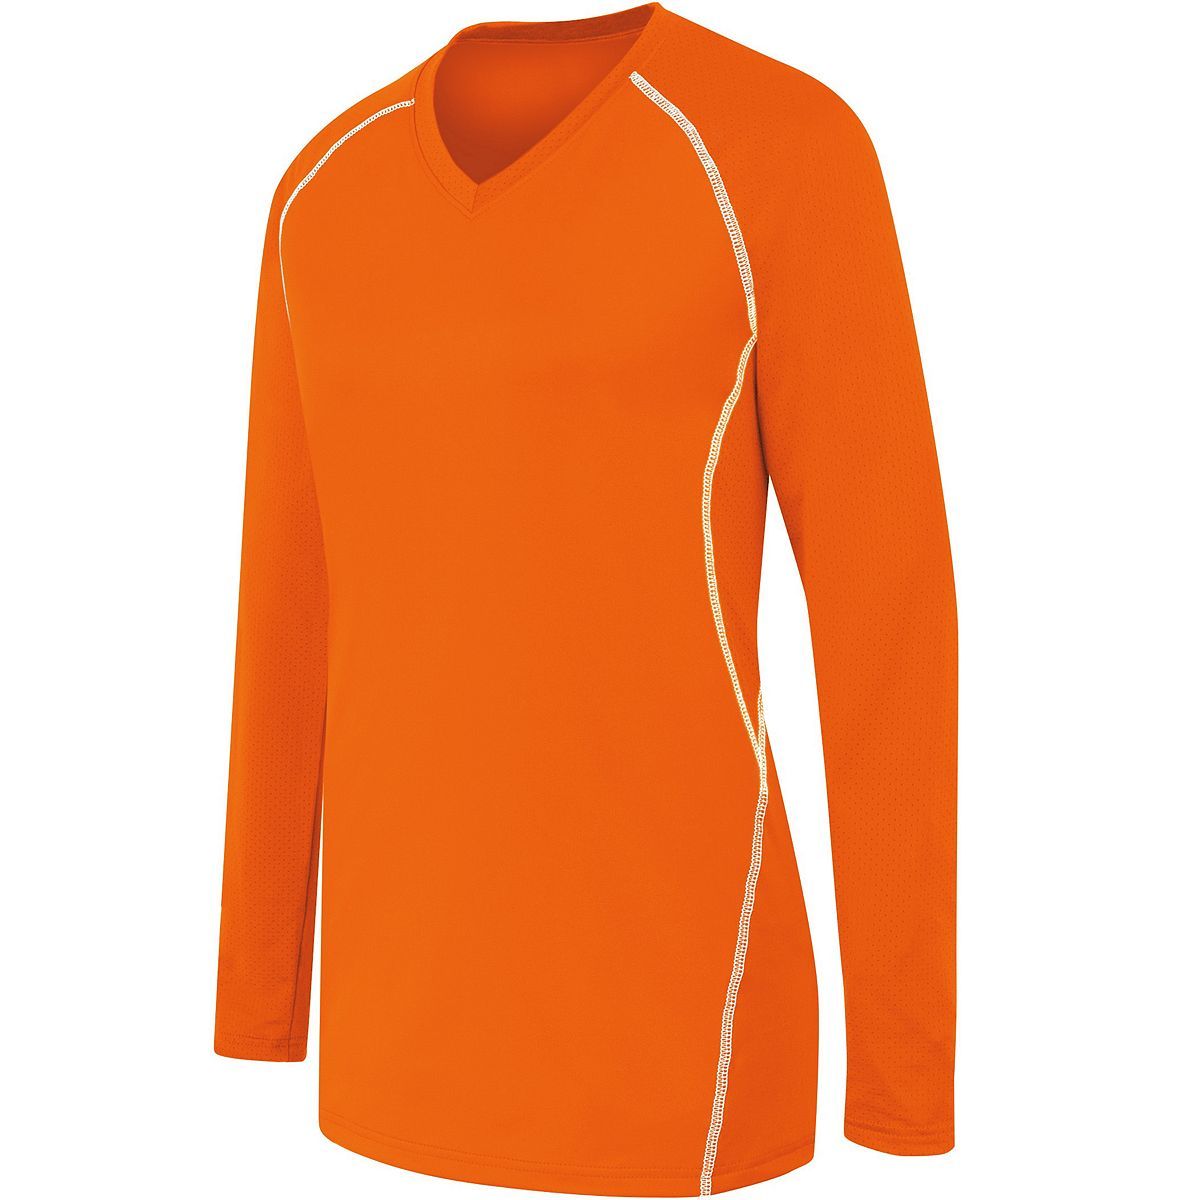 High 5 Girls Long Sleeve Solid Jersey in Orange/White  -Part of the Girls, High5-Products, Volleyball, Girls-Jersey, Shirts product lines at KanaleyCreations.com